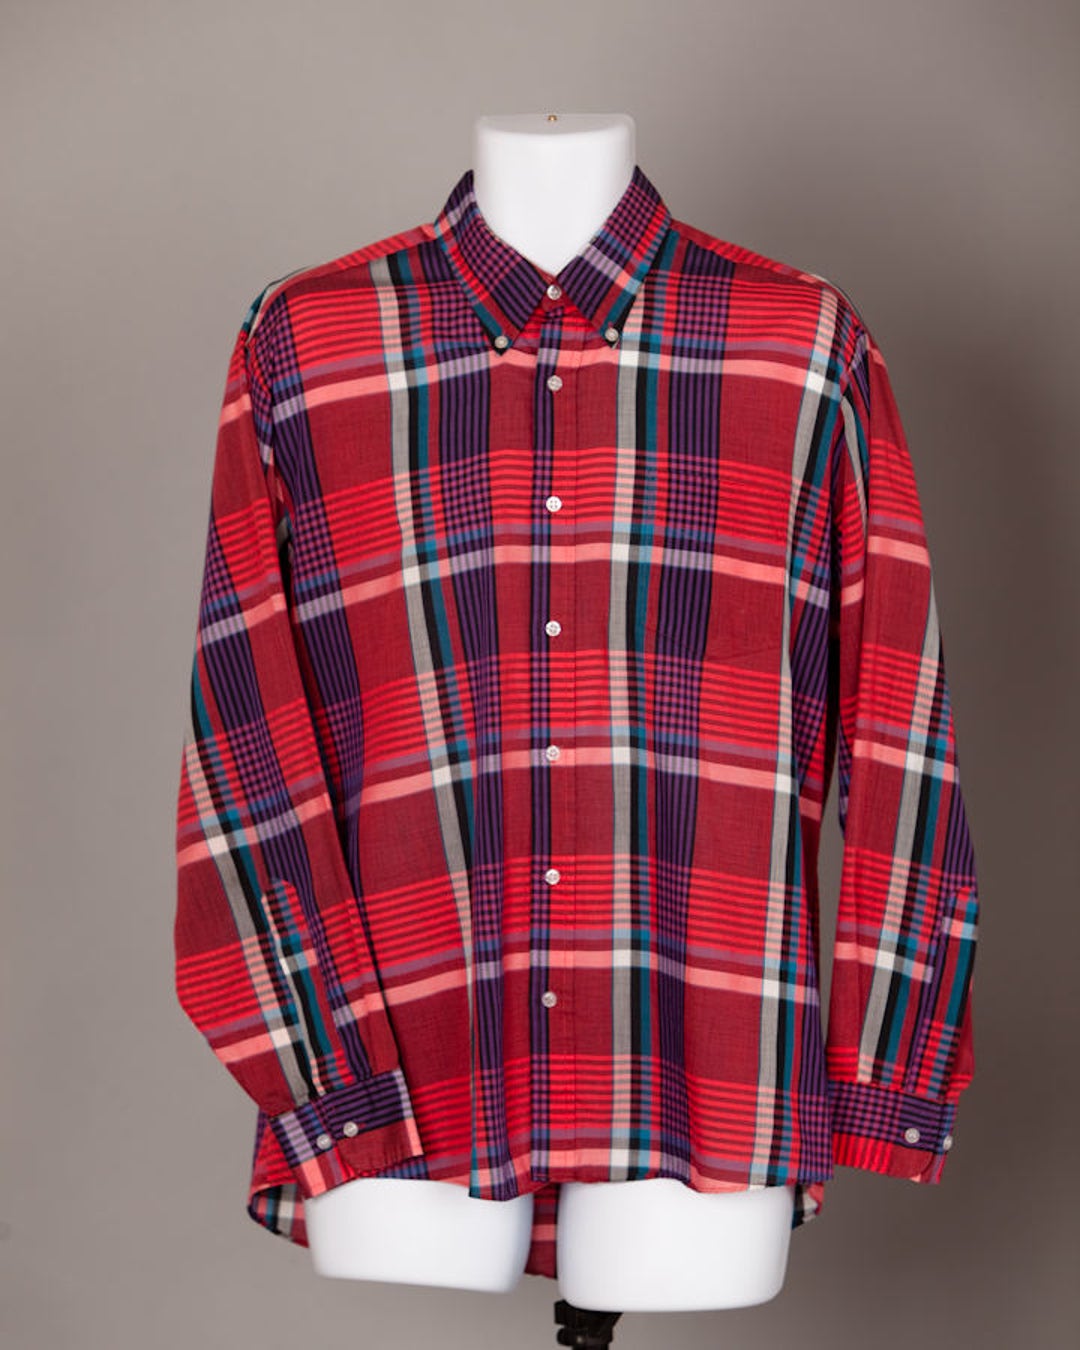 Vintage 80s 90s Mens Red and Blue Plaid Button-up Shirt - Etsy